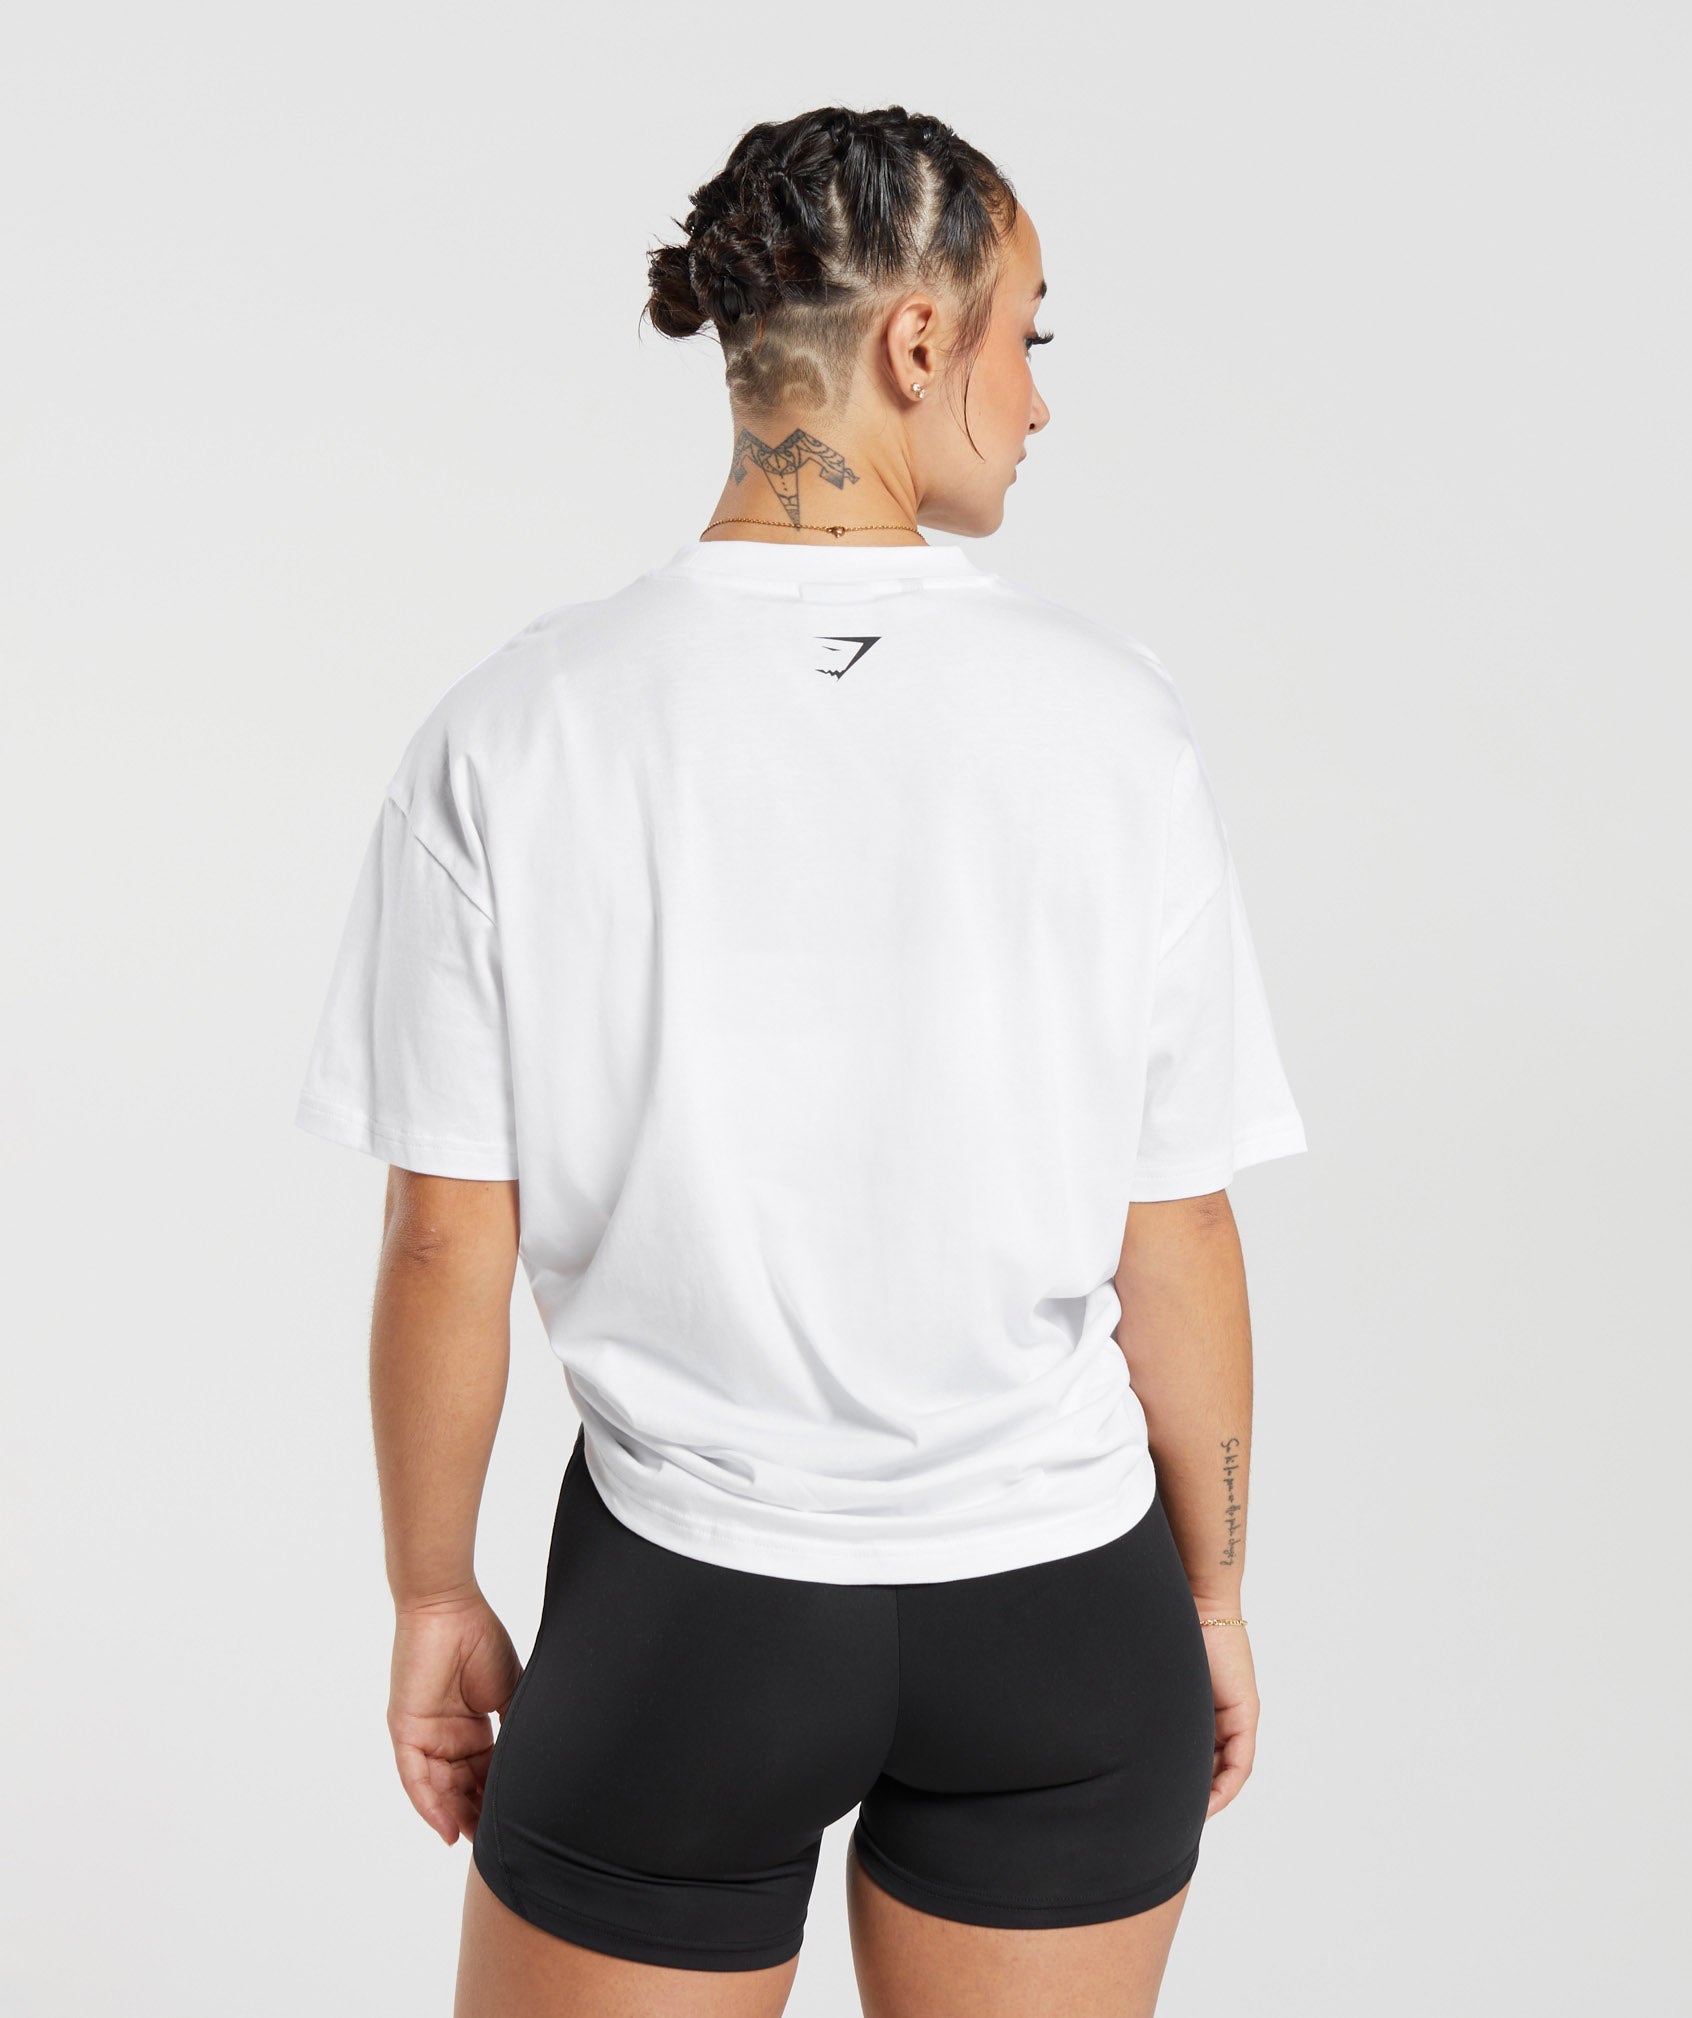 Lifting Essentials Oversized T-shirt in White - view 2